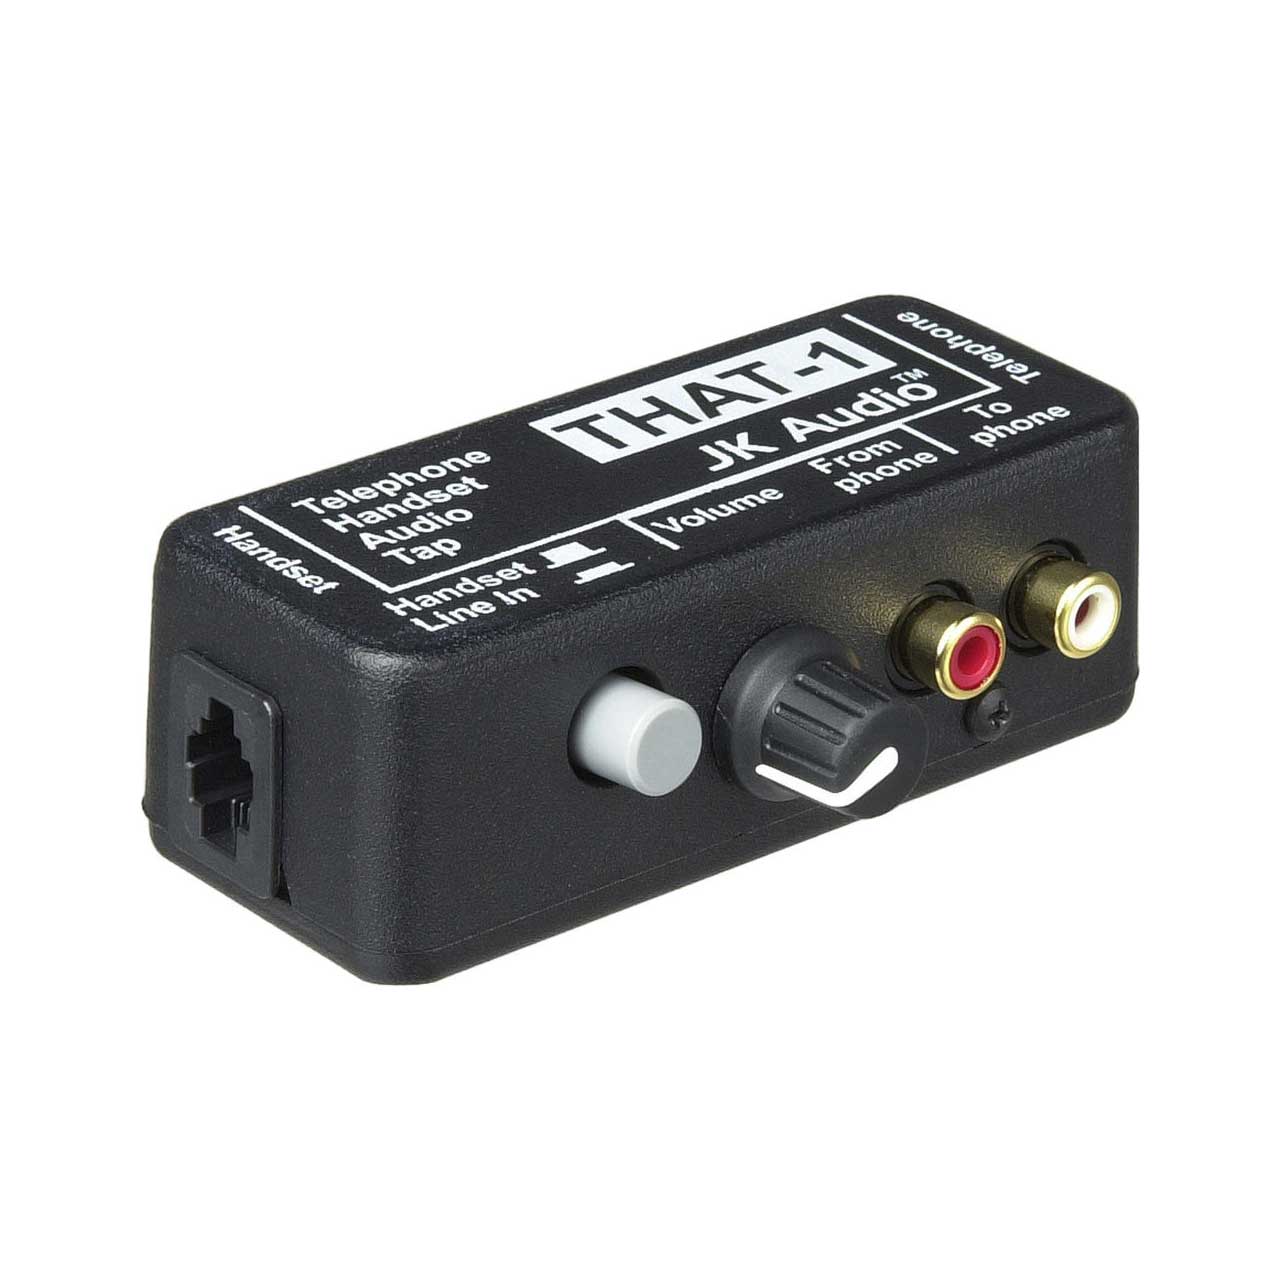 600 ohms RCA Line Input and Output JK Audio TAP-1 Telephone Audio and Power Interface 